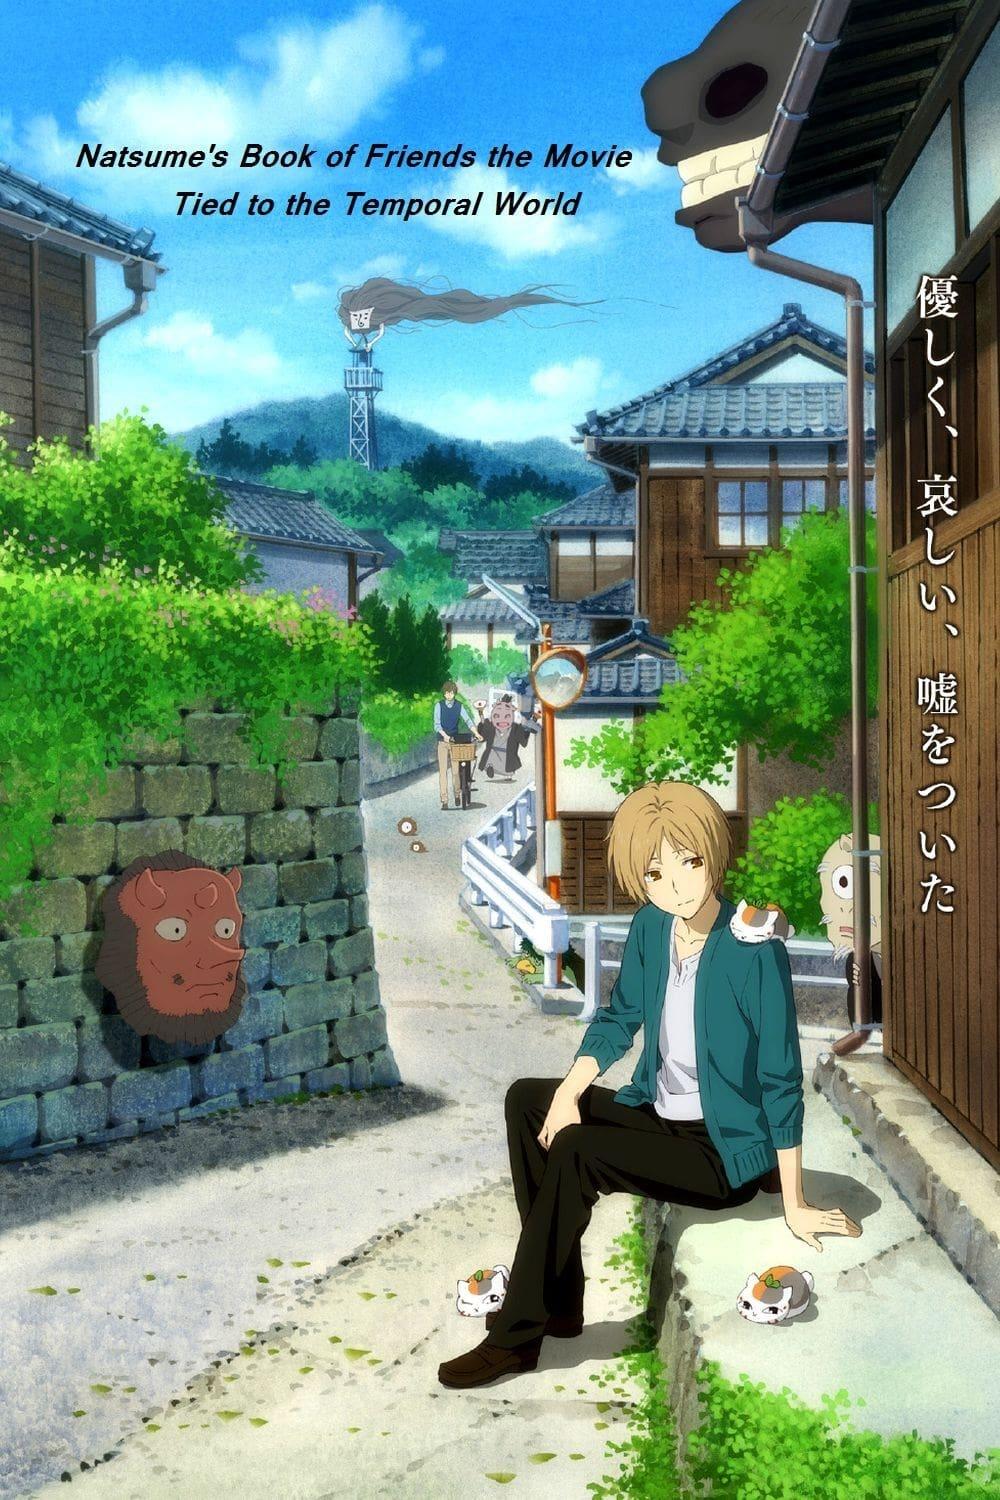 Natsume's Book of Friends: Ephemeral Bond poster